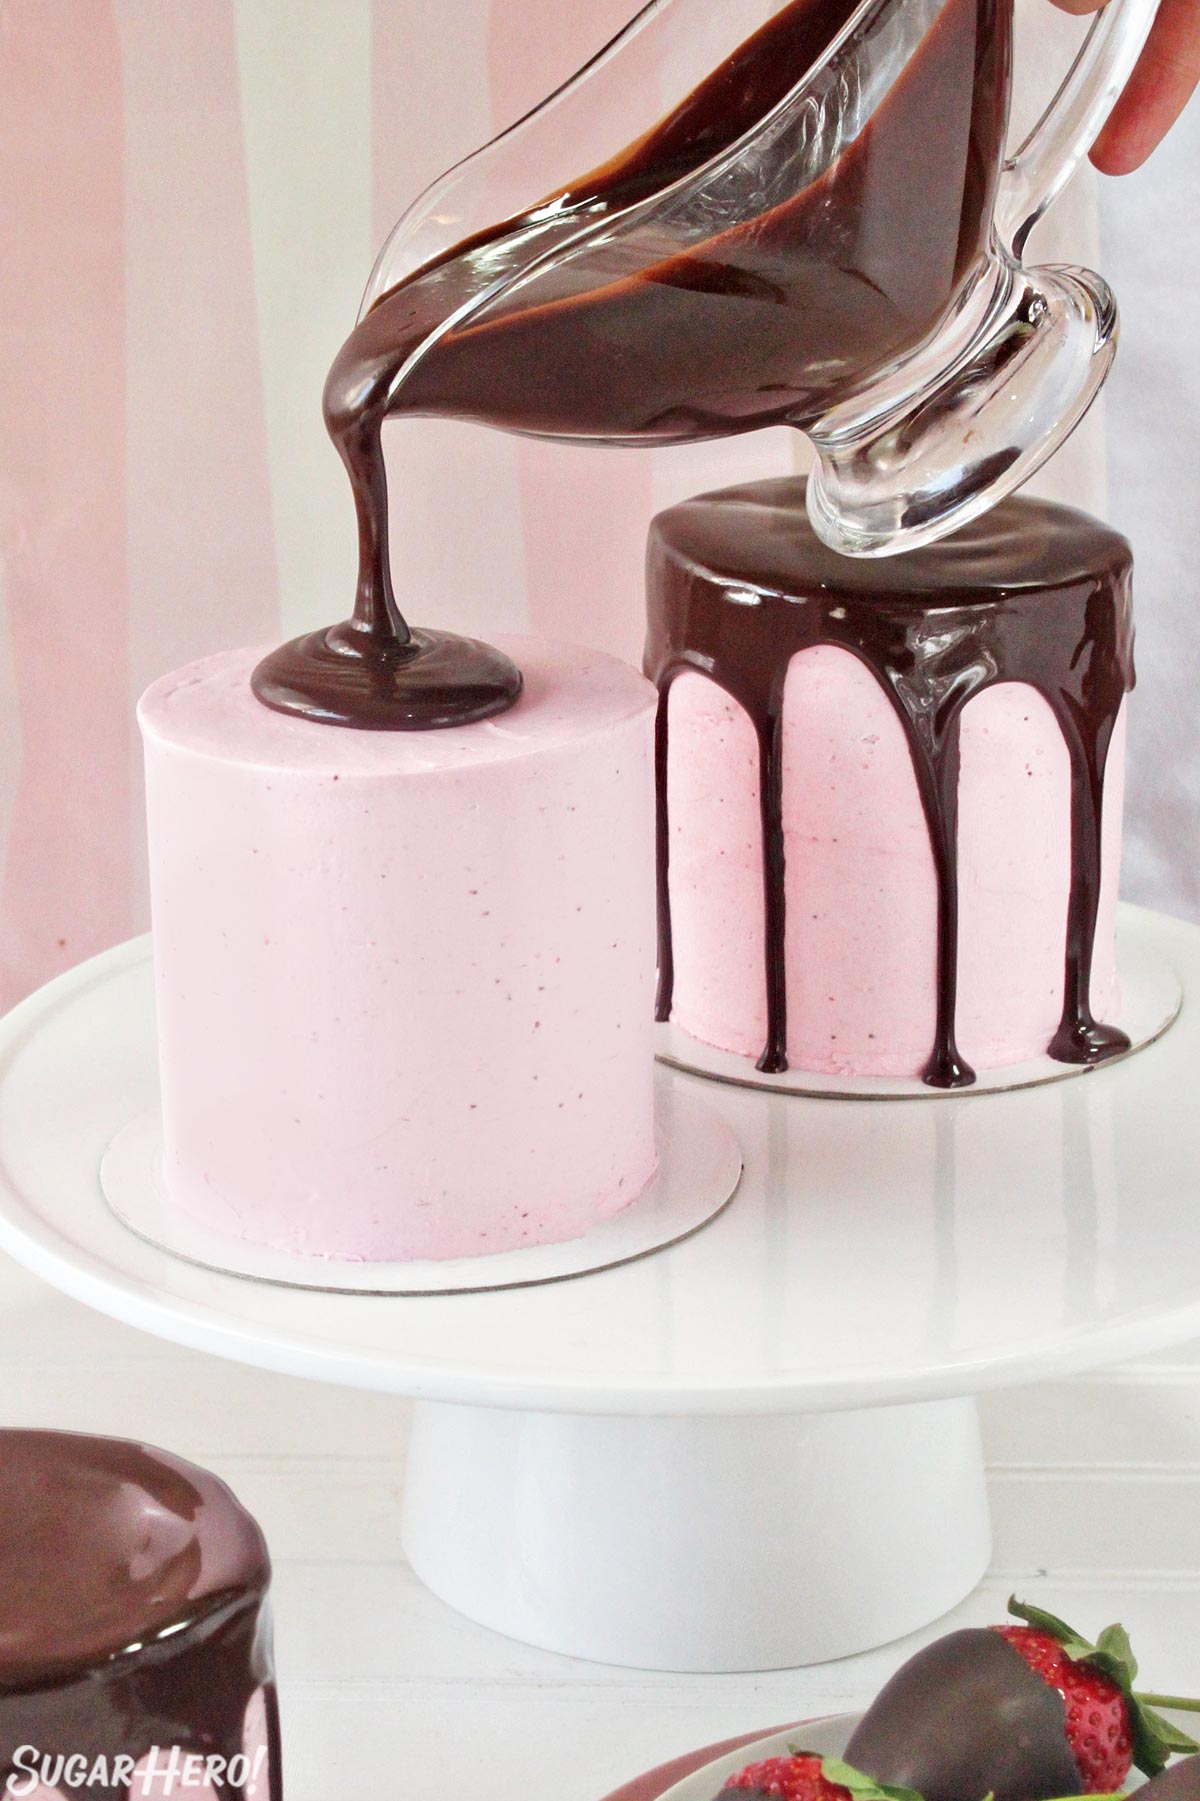 Chocolate-Covered Strawberry Cakes - Four separate photos of different steps of the cake one displayed with a slice taken out. | From SugarHero.com